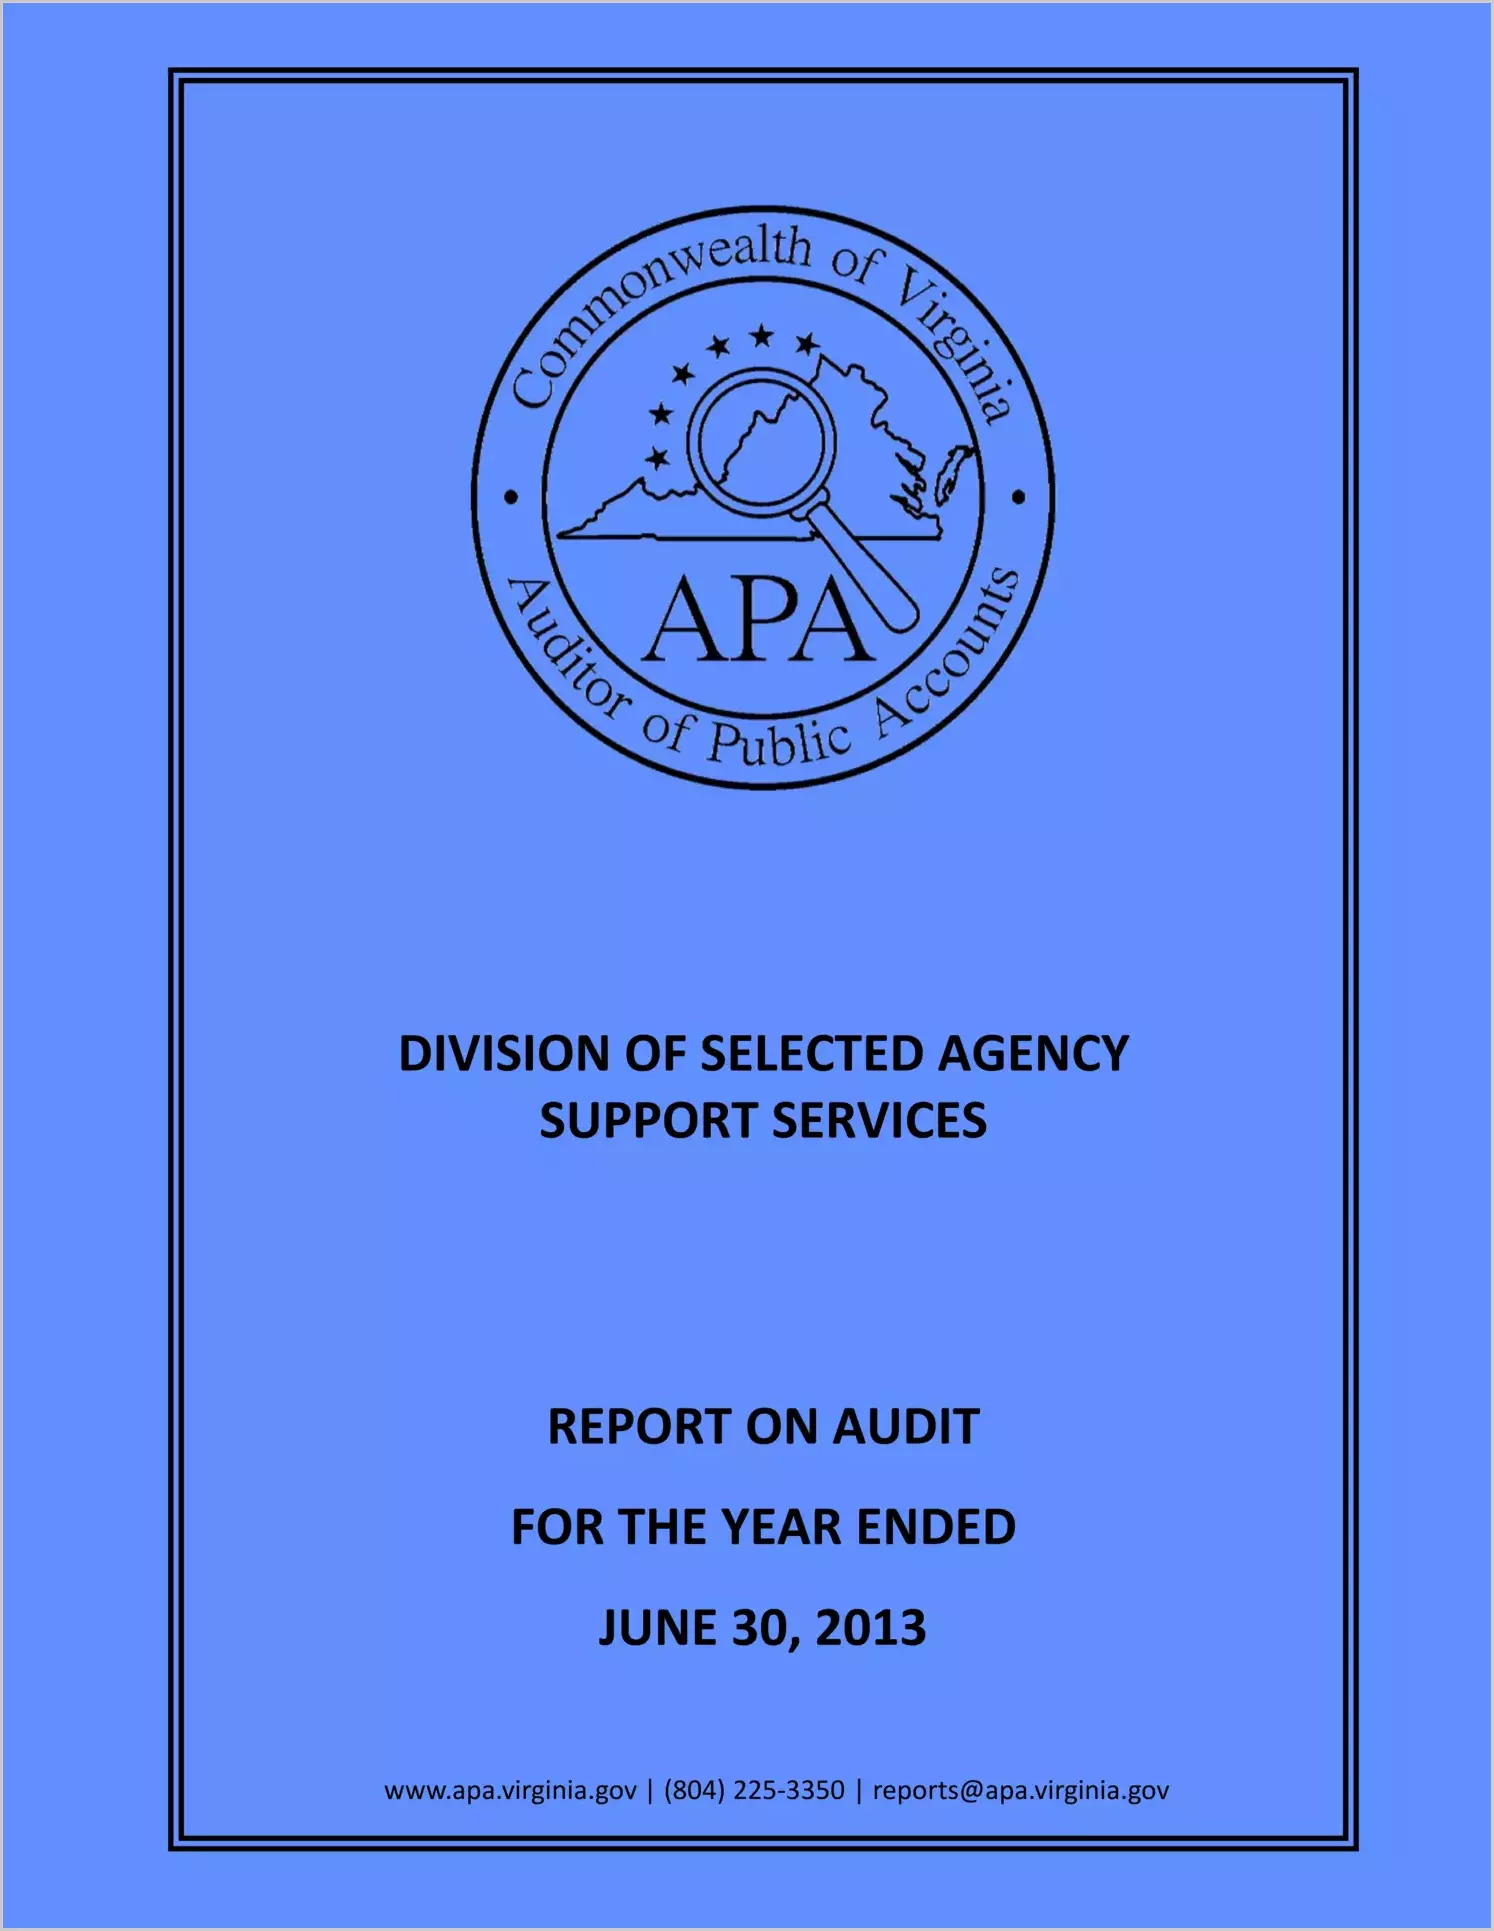 Division of Selected Agency Support Services for the year ended June 30, 2013